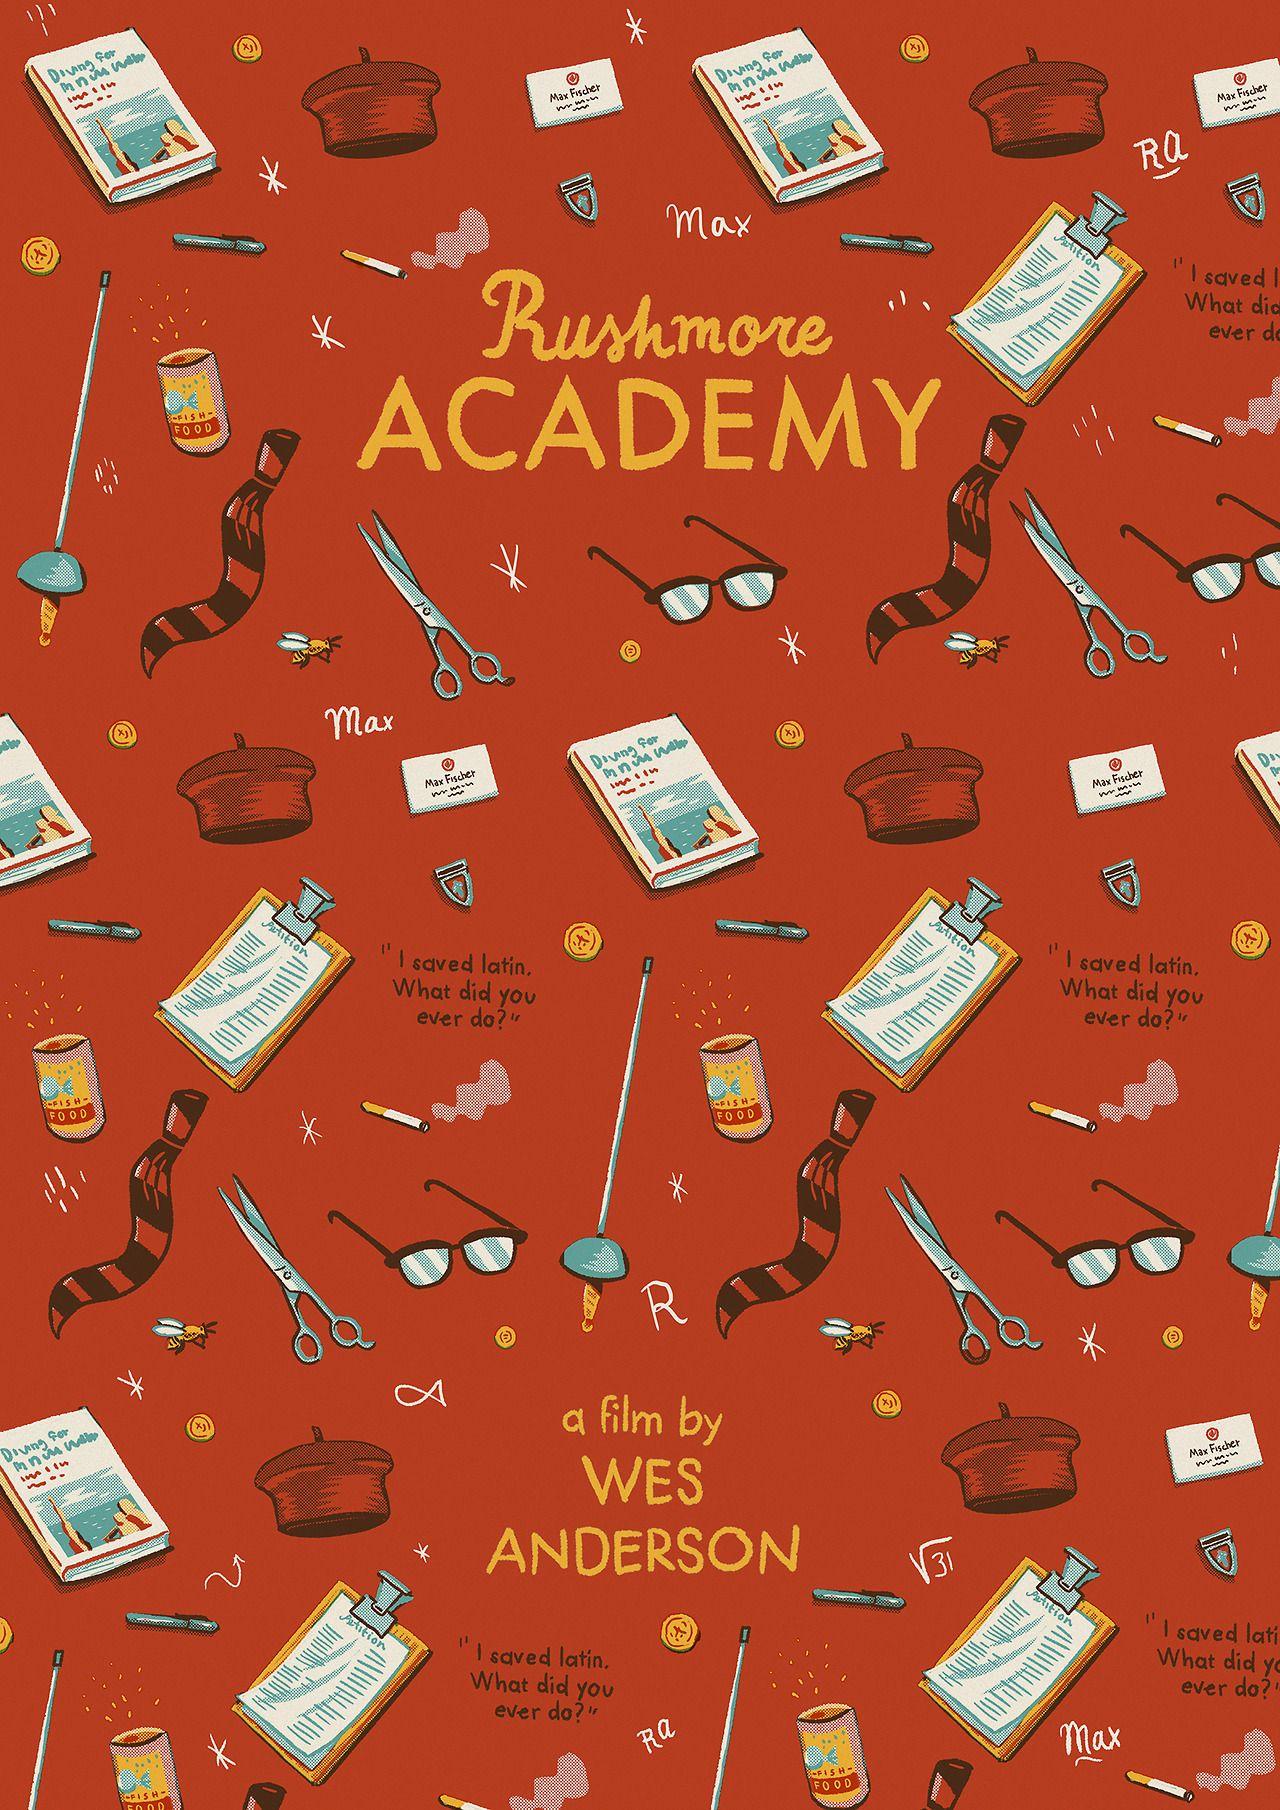 Wes Anderson Wallpaper. Last poster for the Wes Anderson series, I